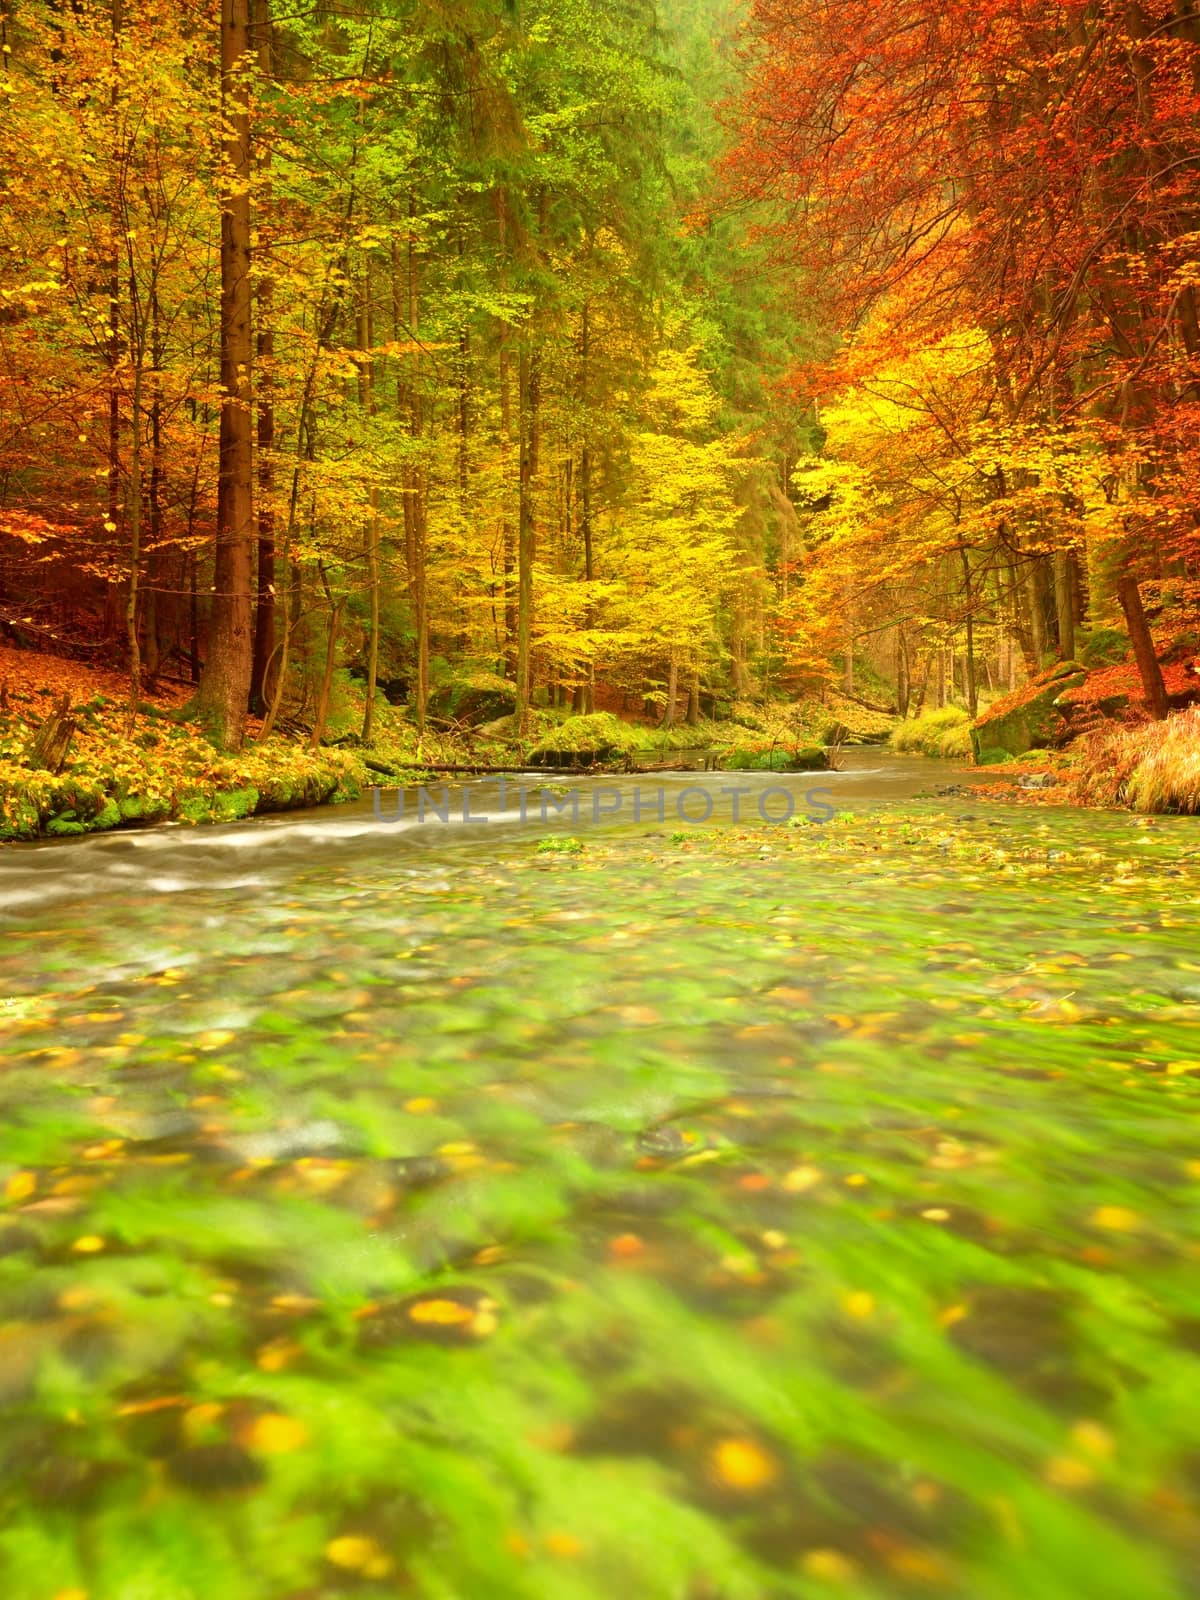 Autumn nature. Mountain river with low level of water, colorful leaves in forest  by rdonar2